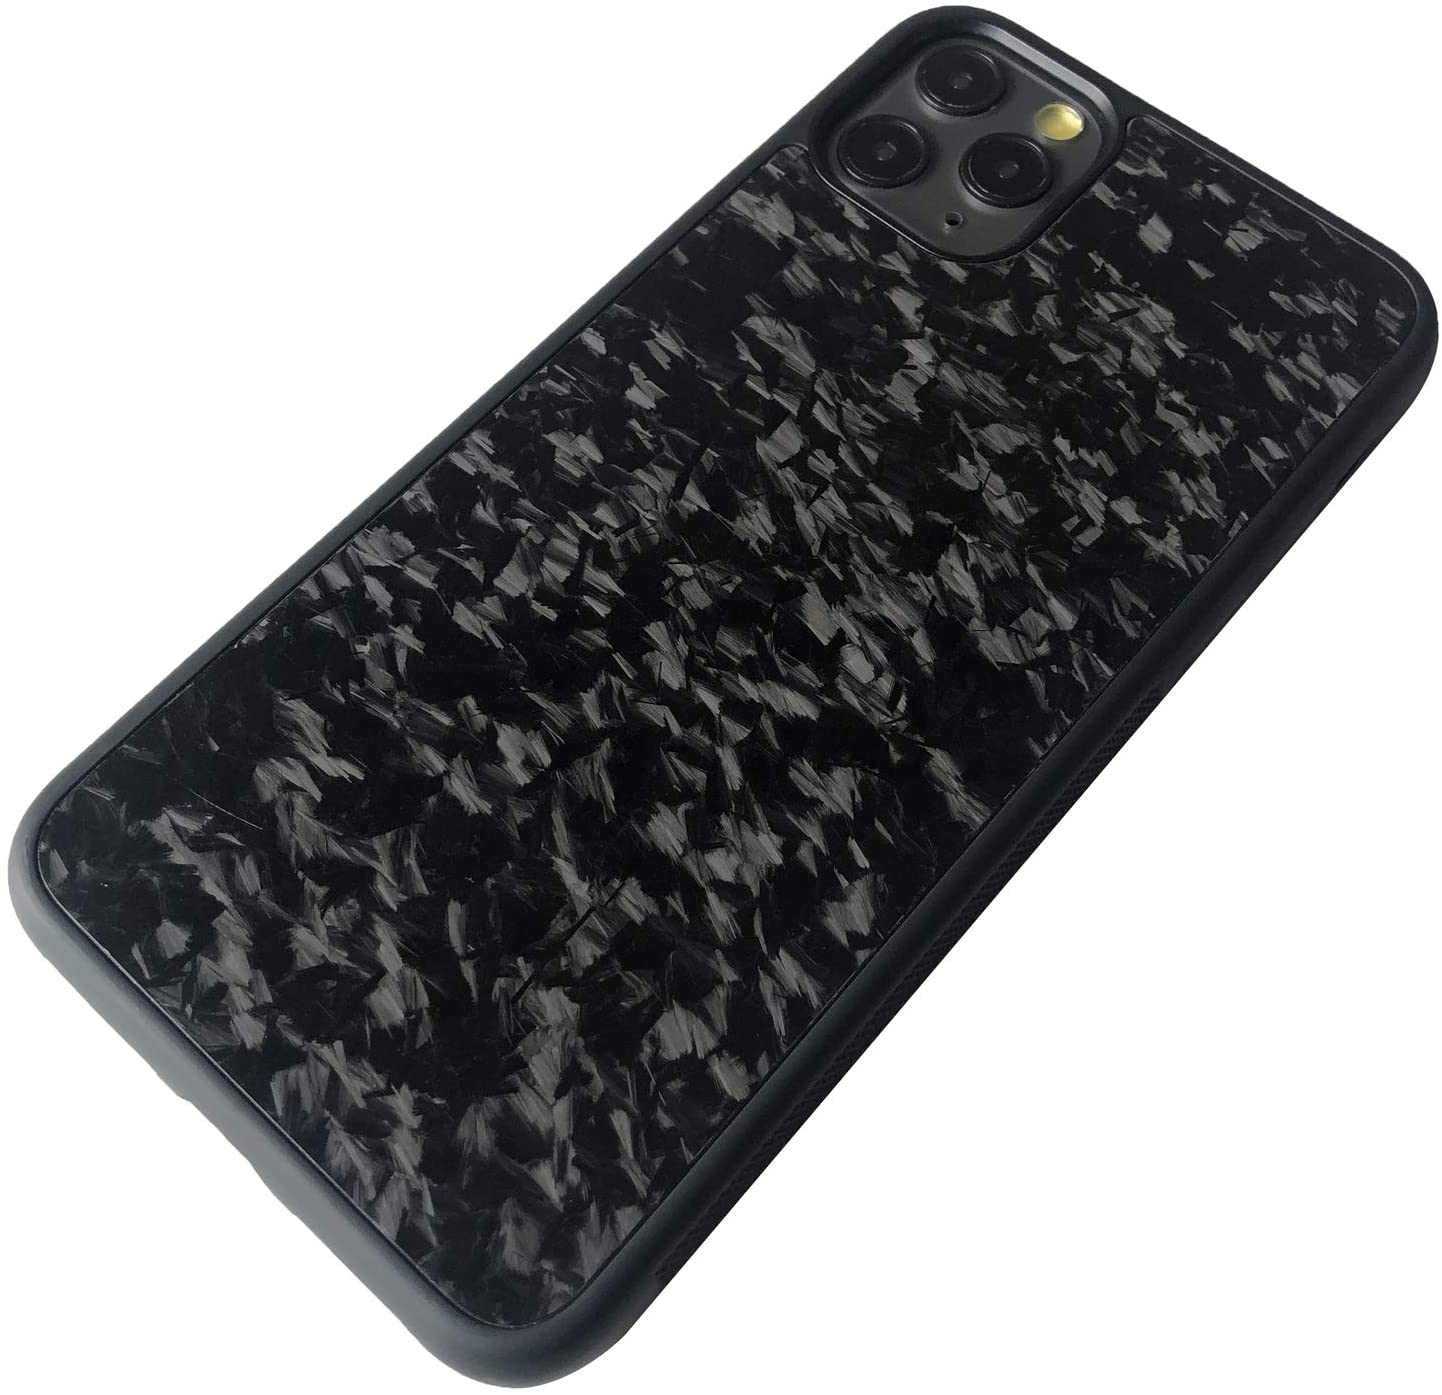 Molzar Grip Series iPhone 11 Pro Max Case with Real Weave Carbon Fiber - Molzar-iphone cases and accessories